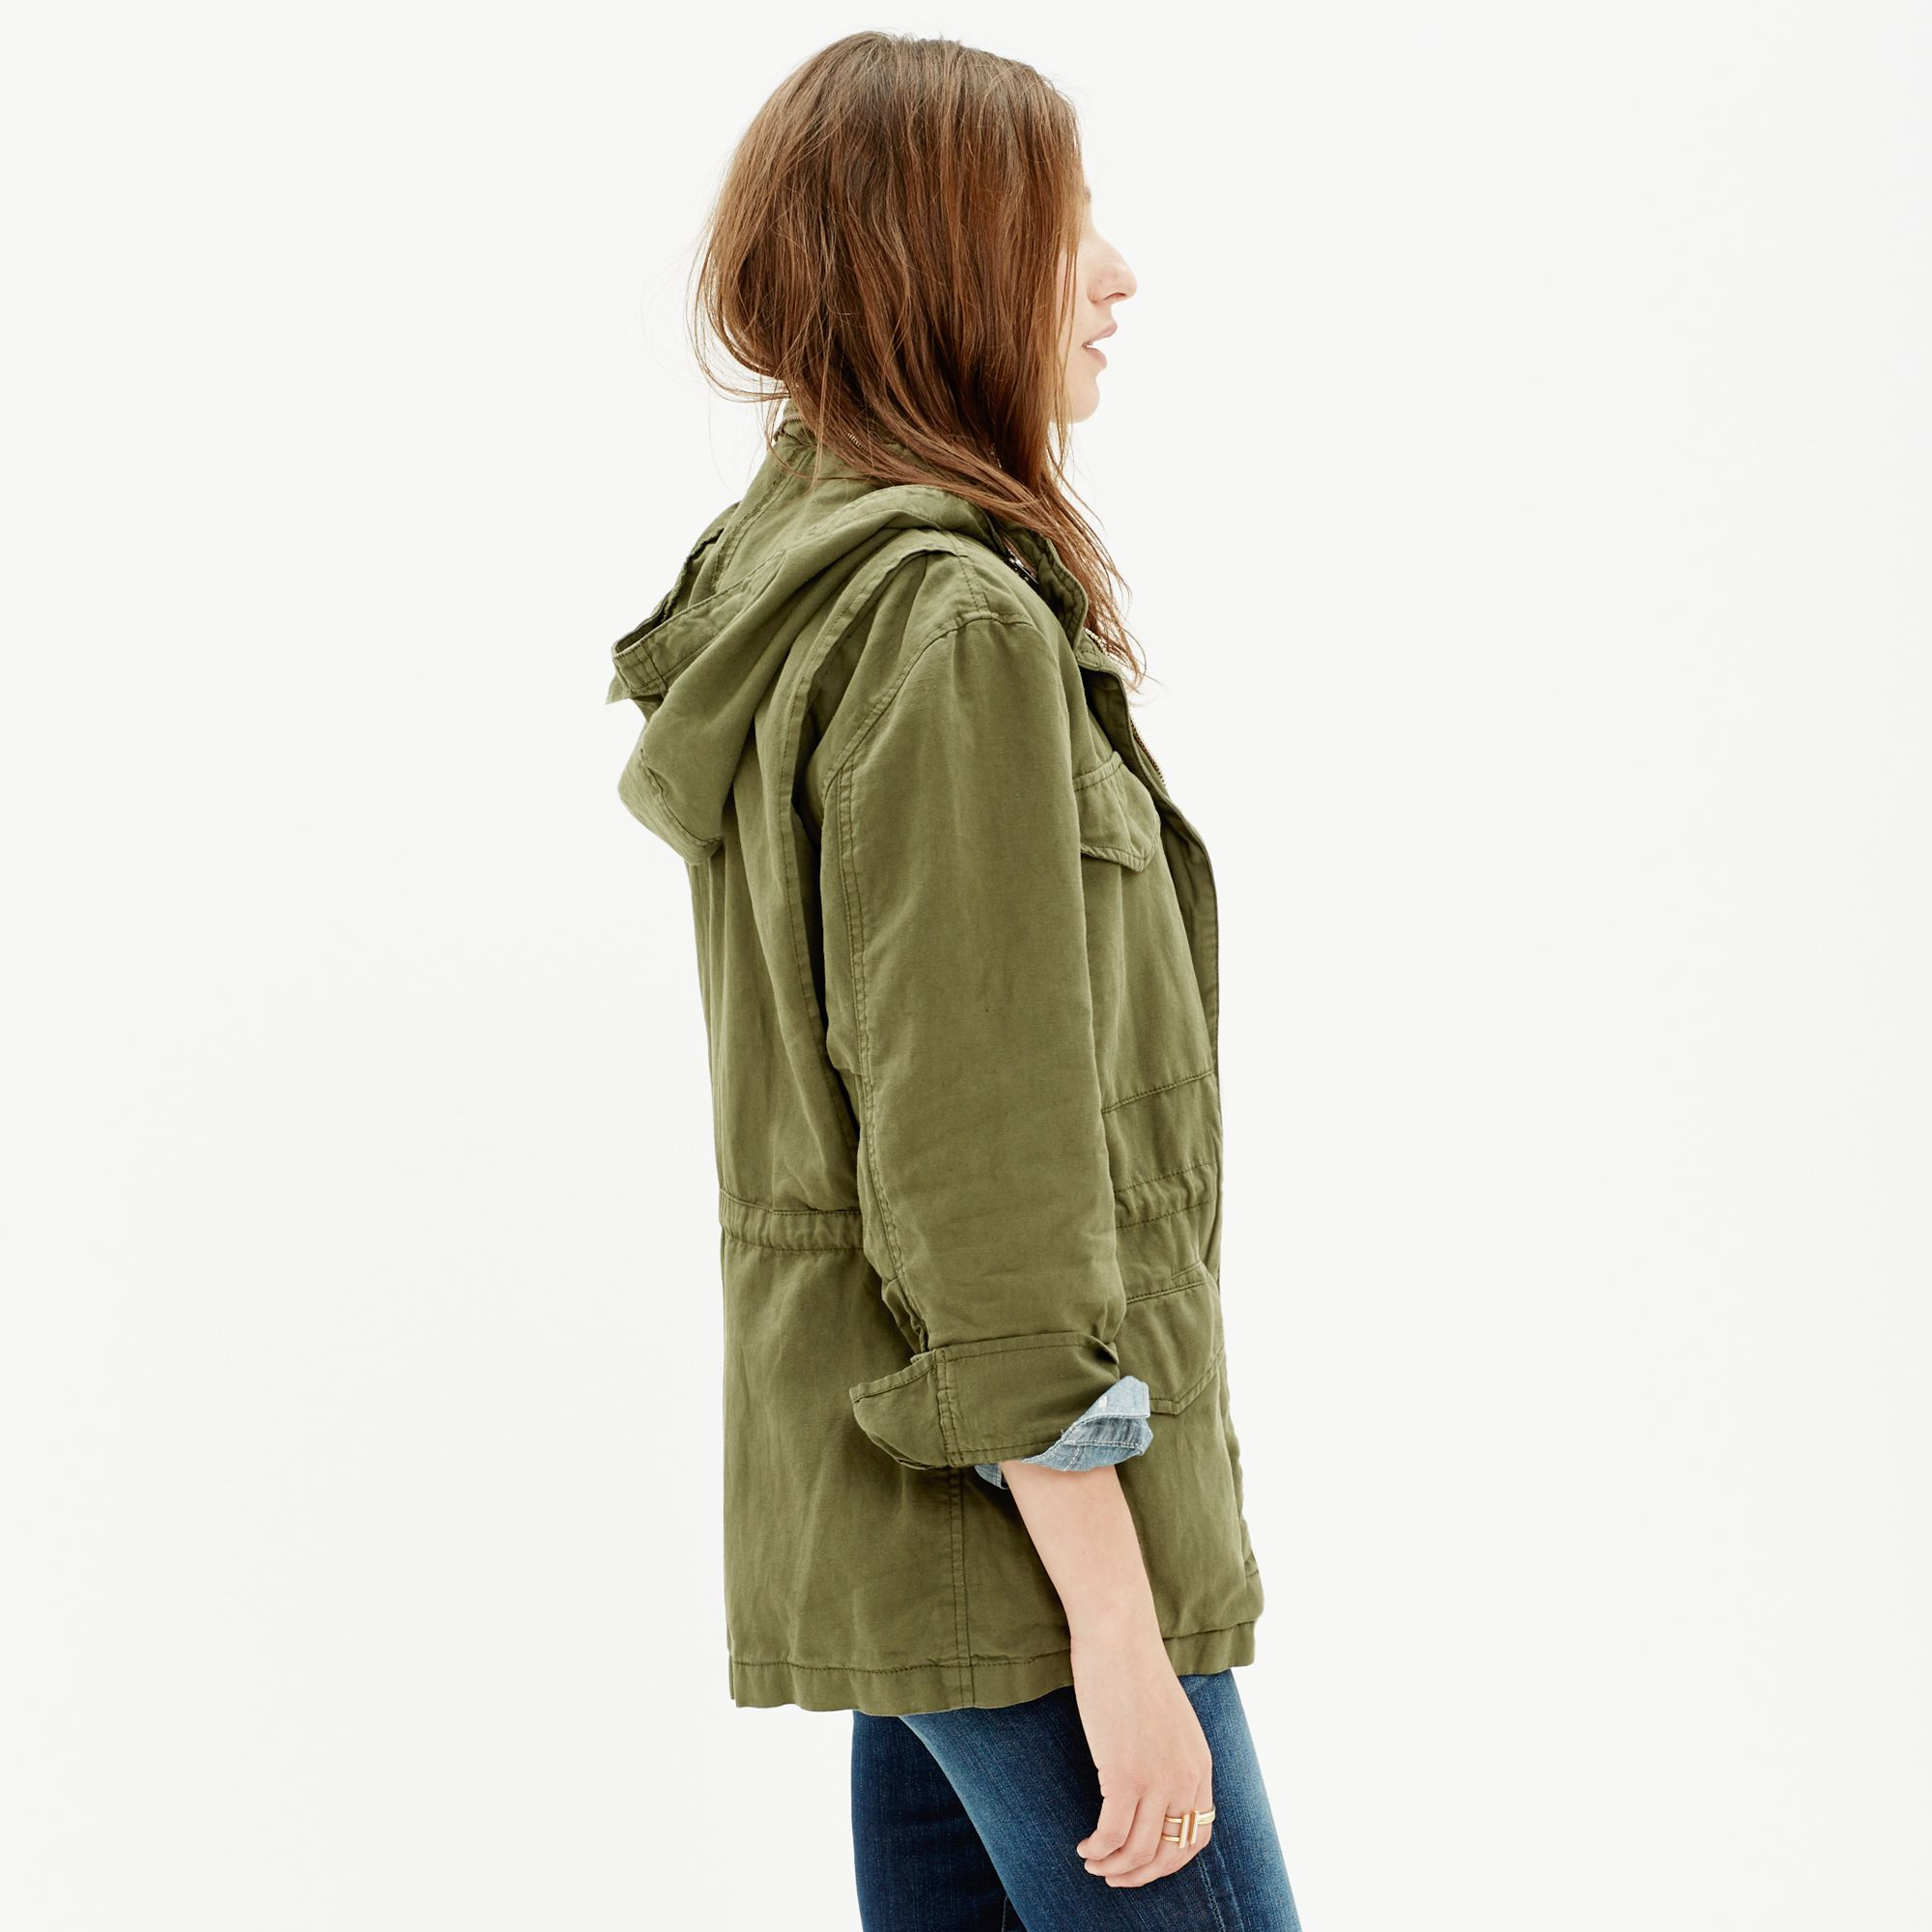 Madewell Military Anorak in Green - Lyst